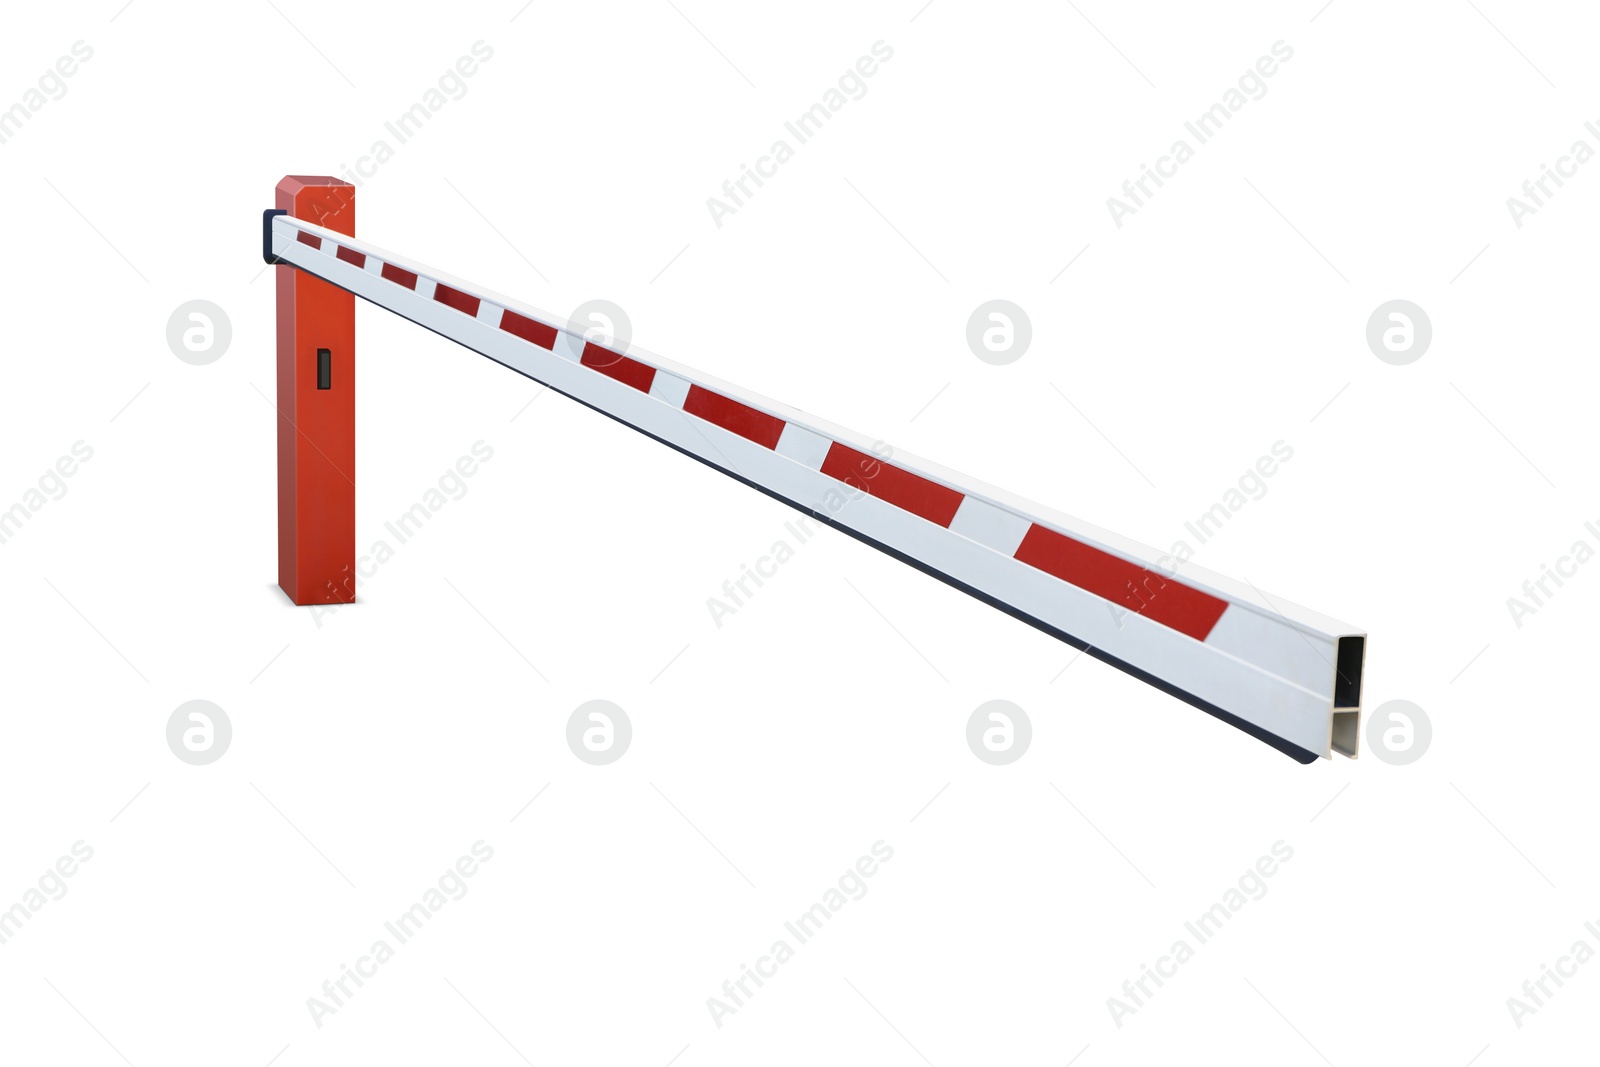 Image of One closed boom barrier isolated on white